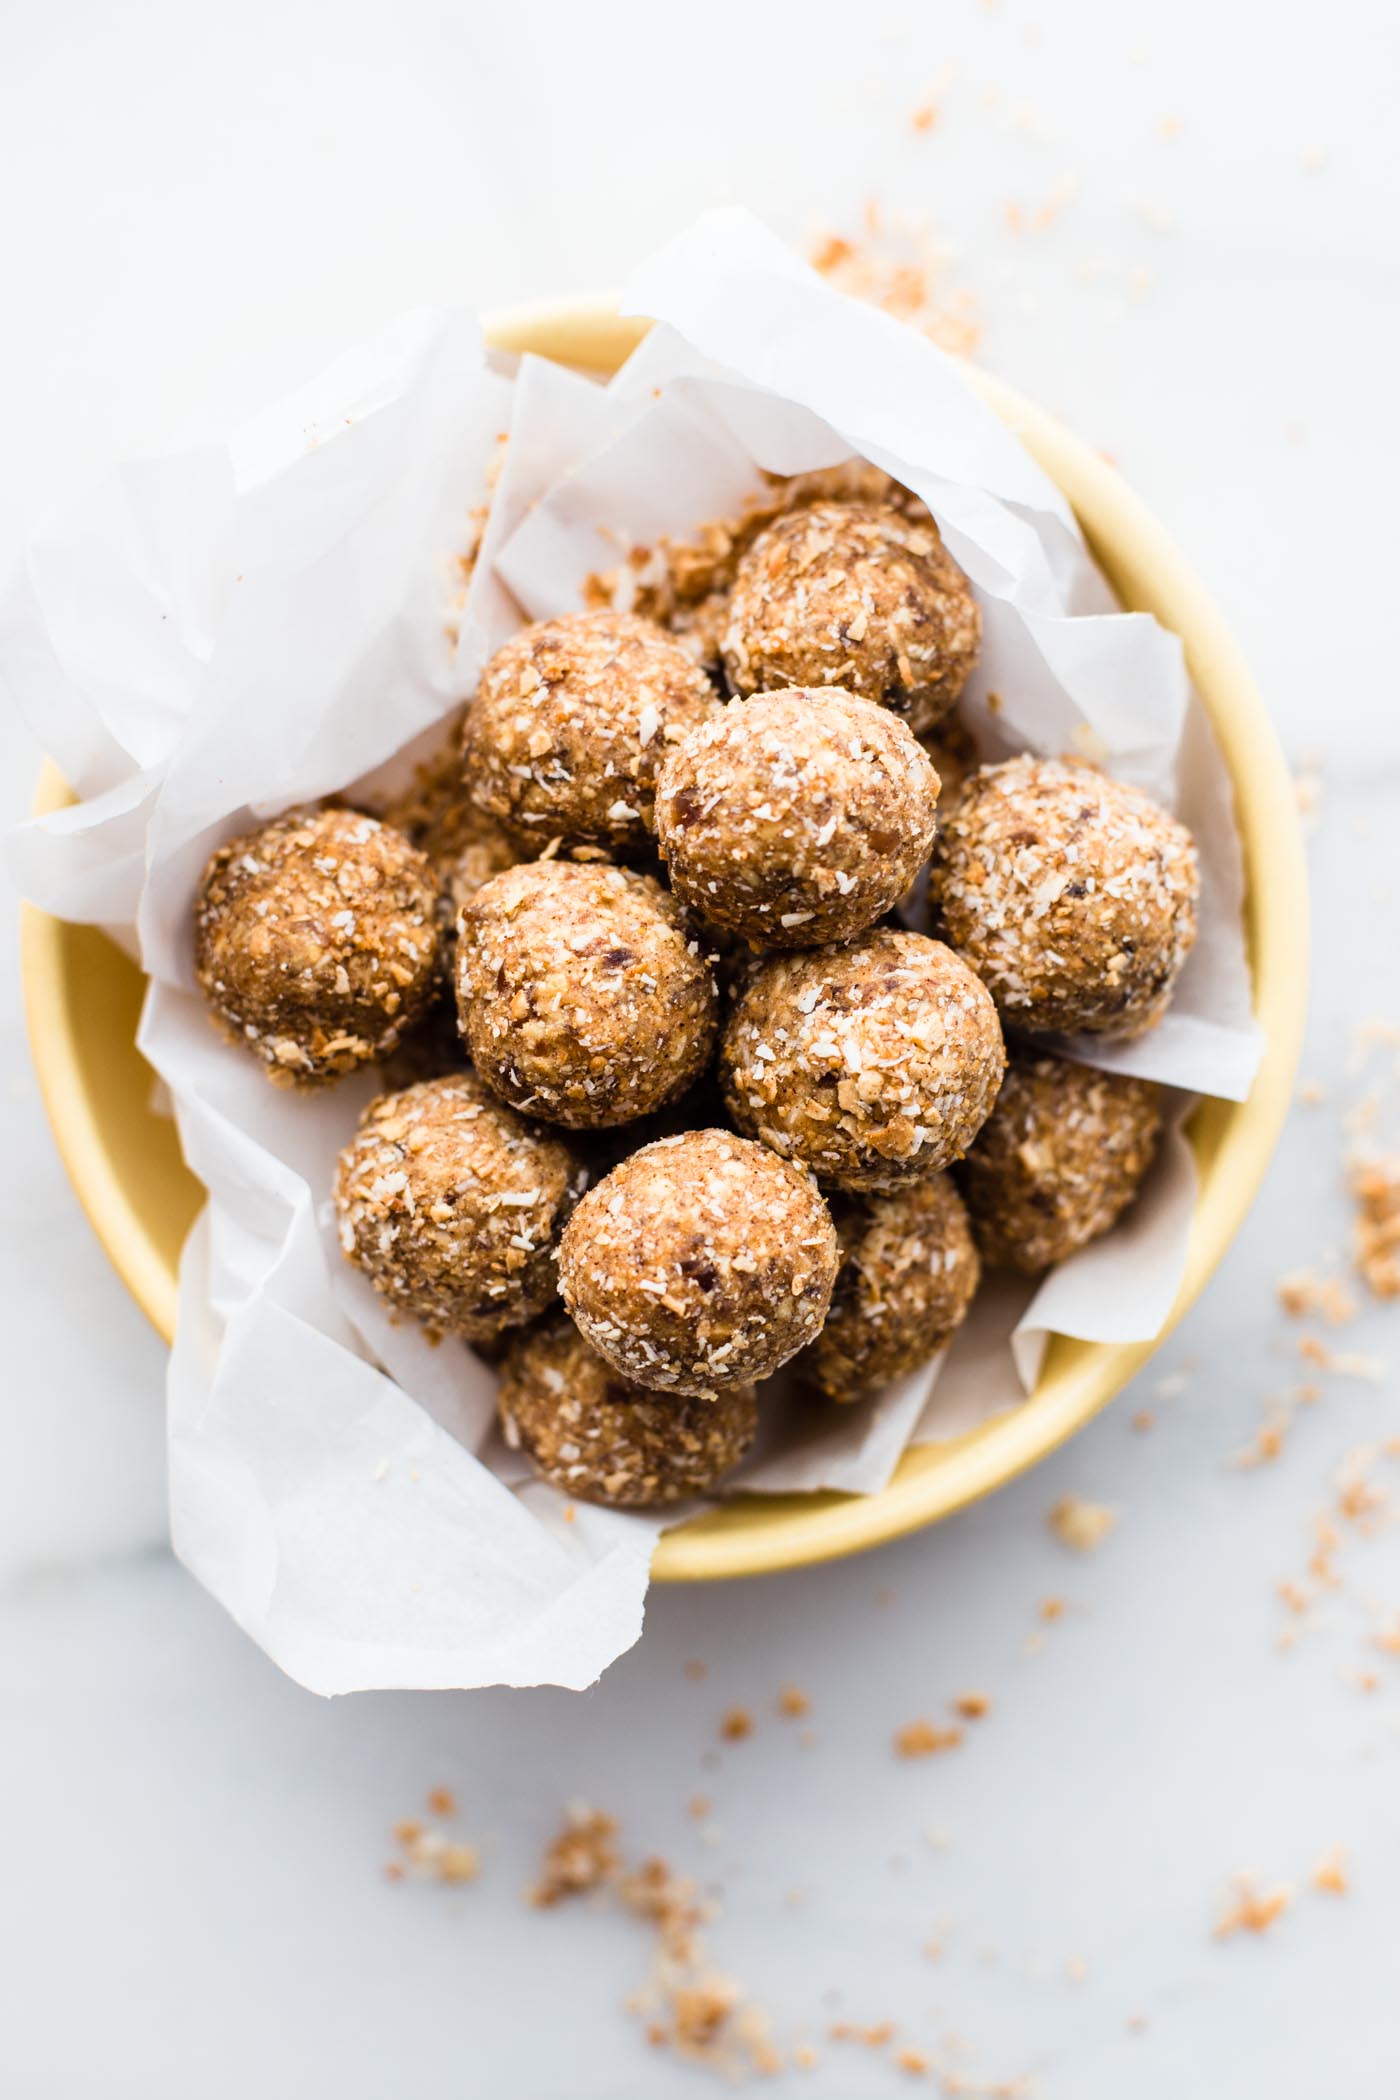 a healthy vegan snack - Toasted Coconut Bliss Balls